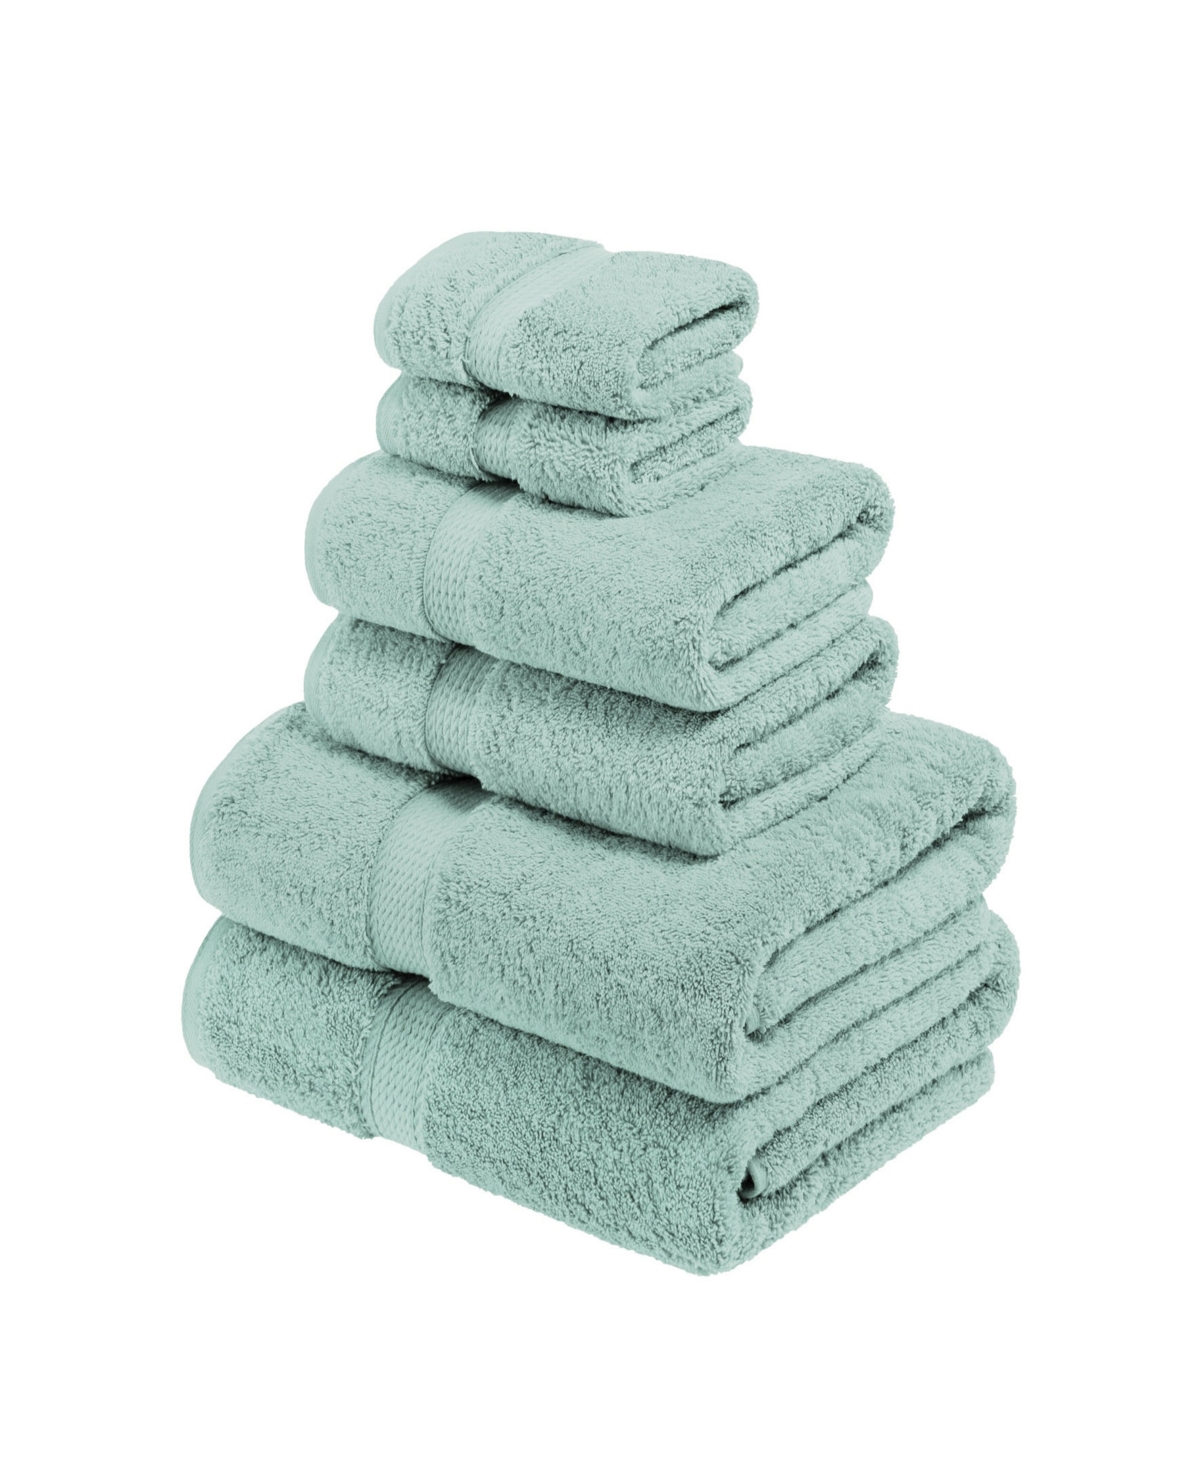 Superior Highly Absorbent 6 Piece Egyptian Cotton Ultra Plush Solid Assorted Bath Towel Set Bedding In Sea Foam